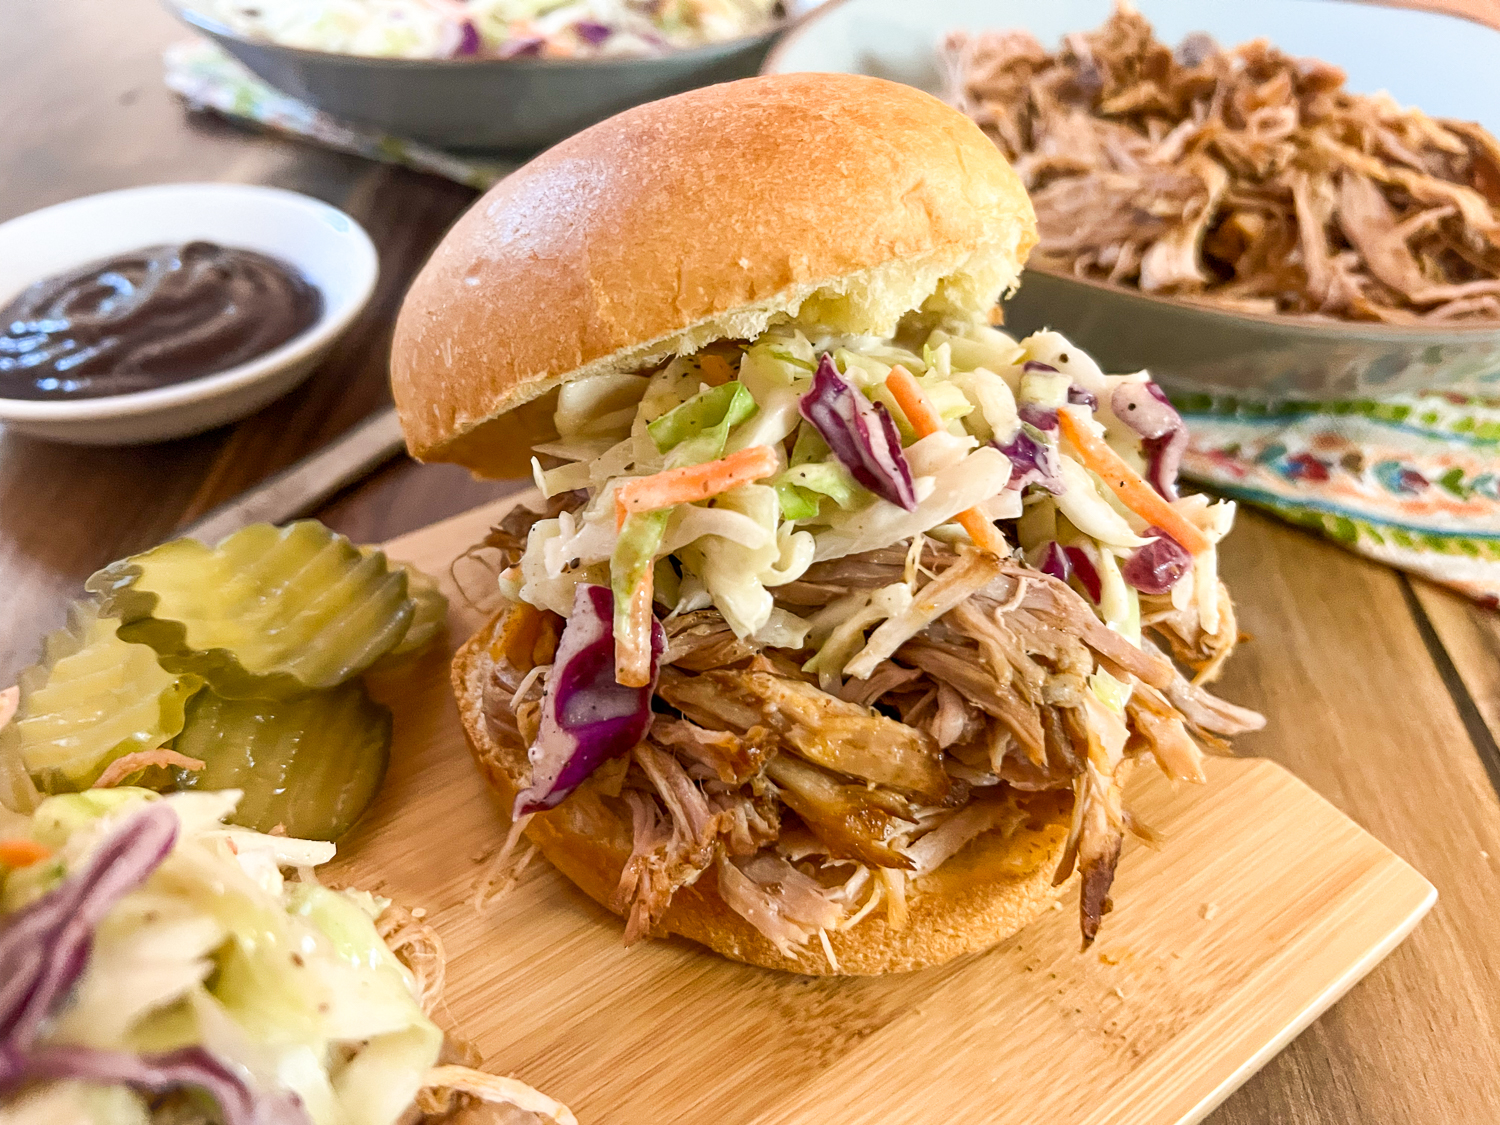 Smoked pulled pork in a bun topped with coleslaw.